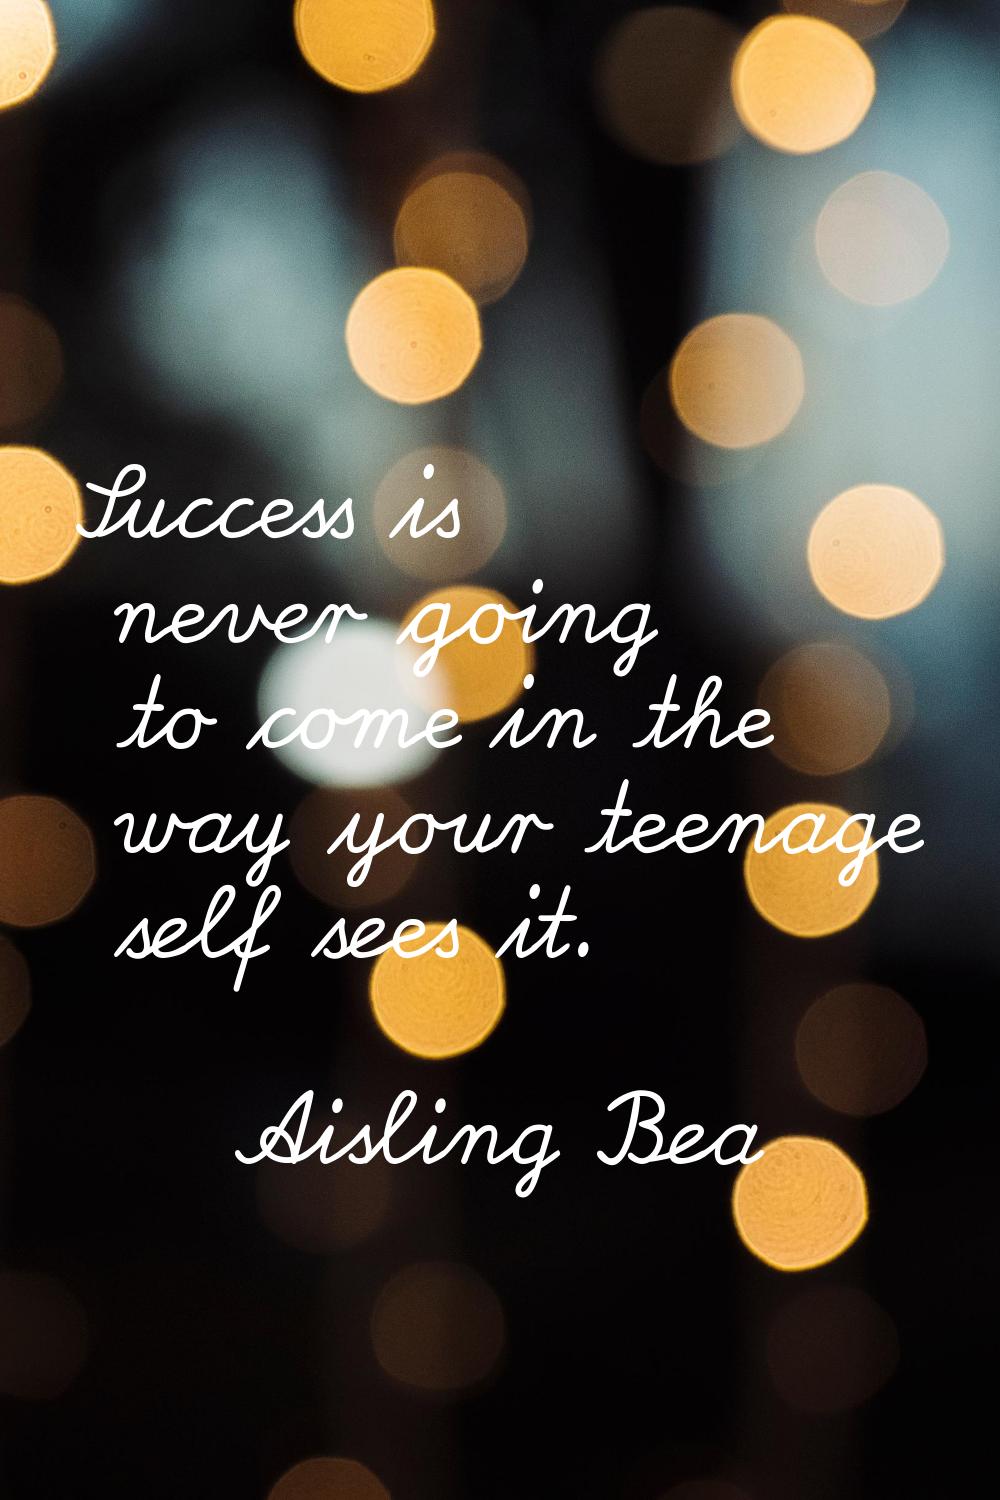 Success is never going to come in the way your teenage self sees it.